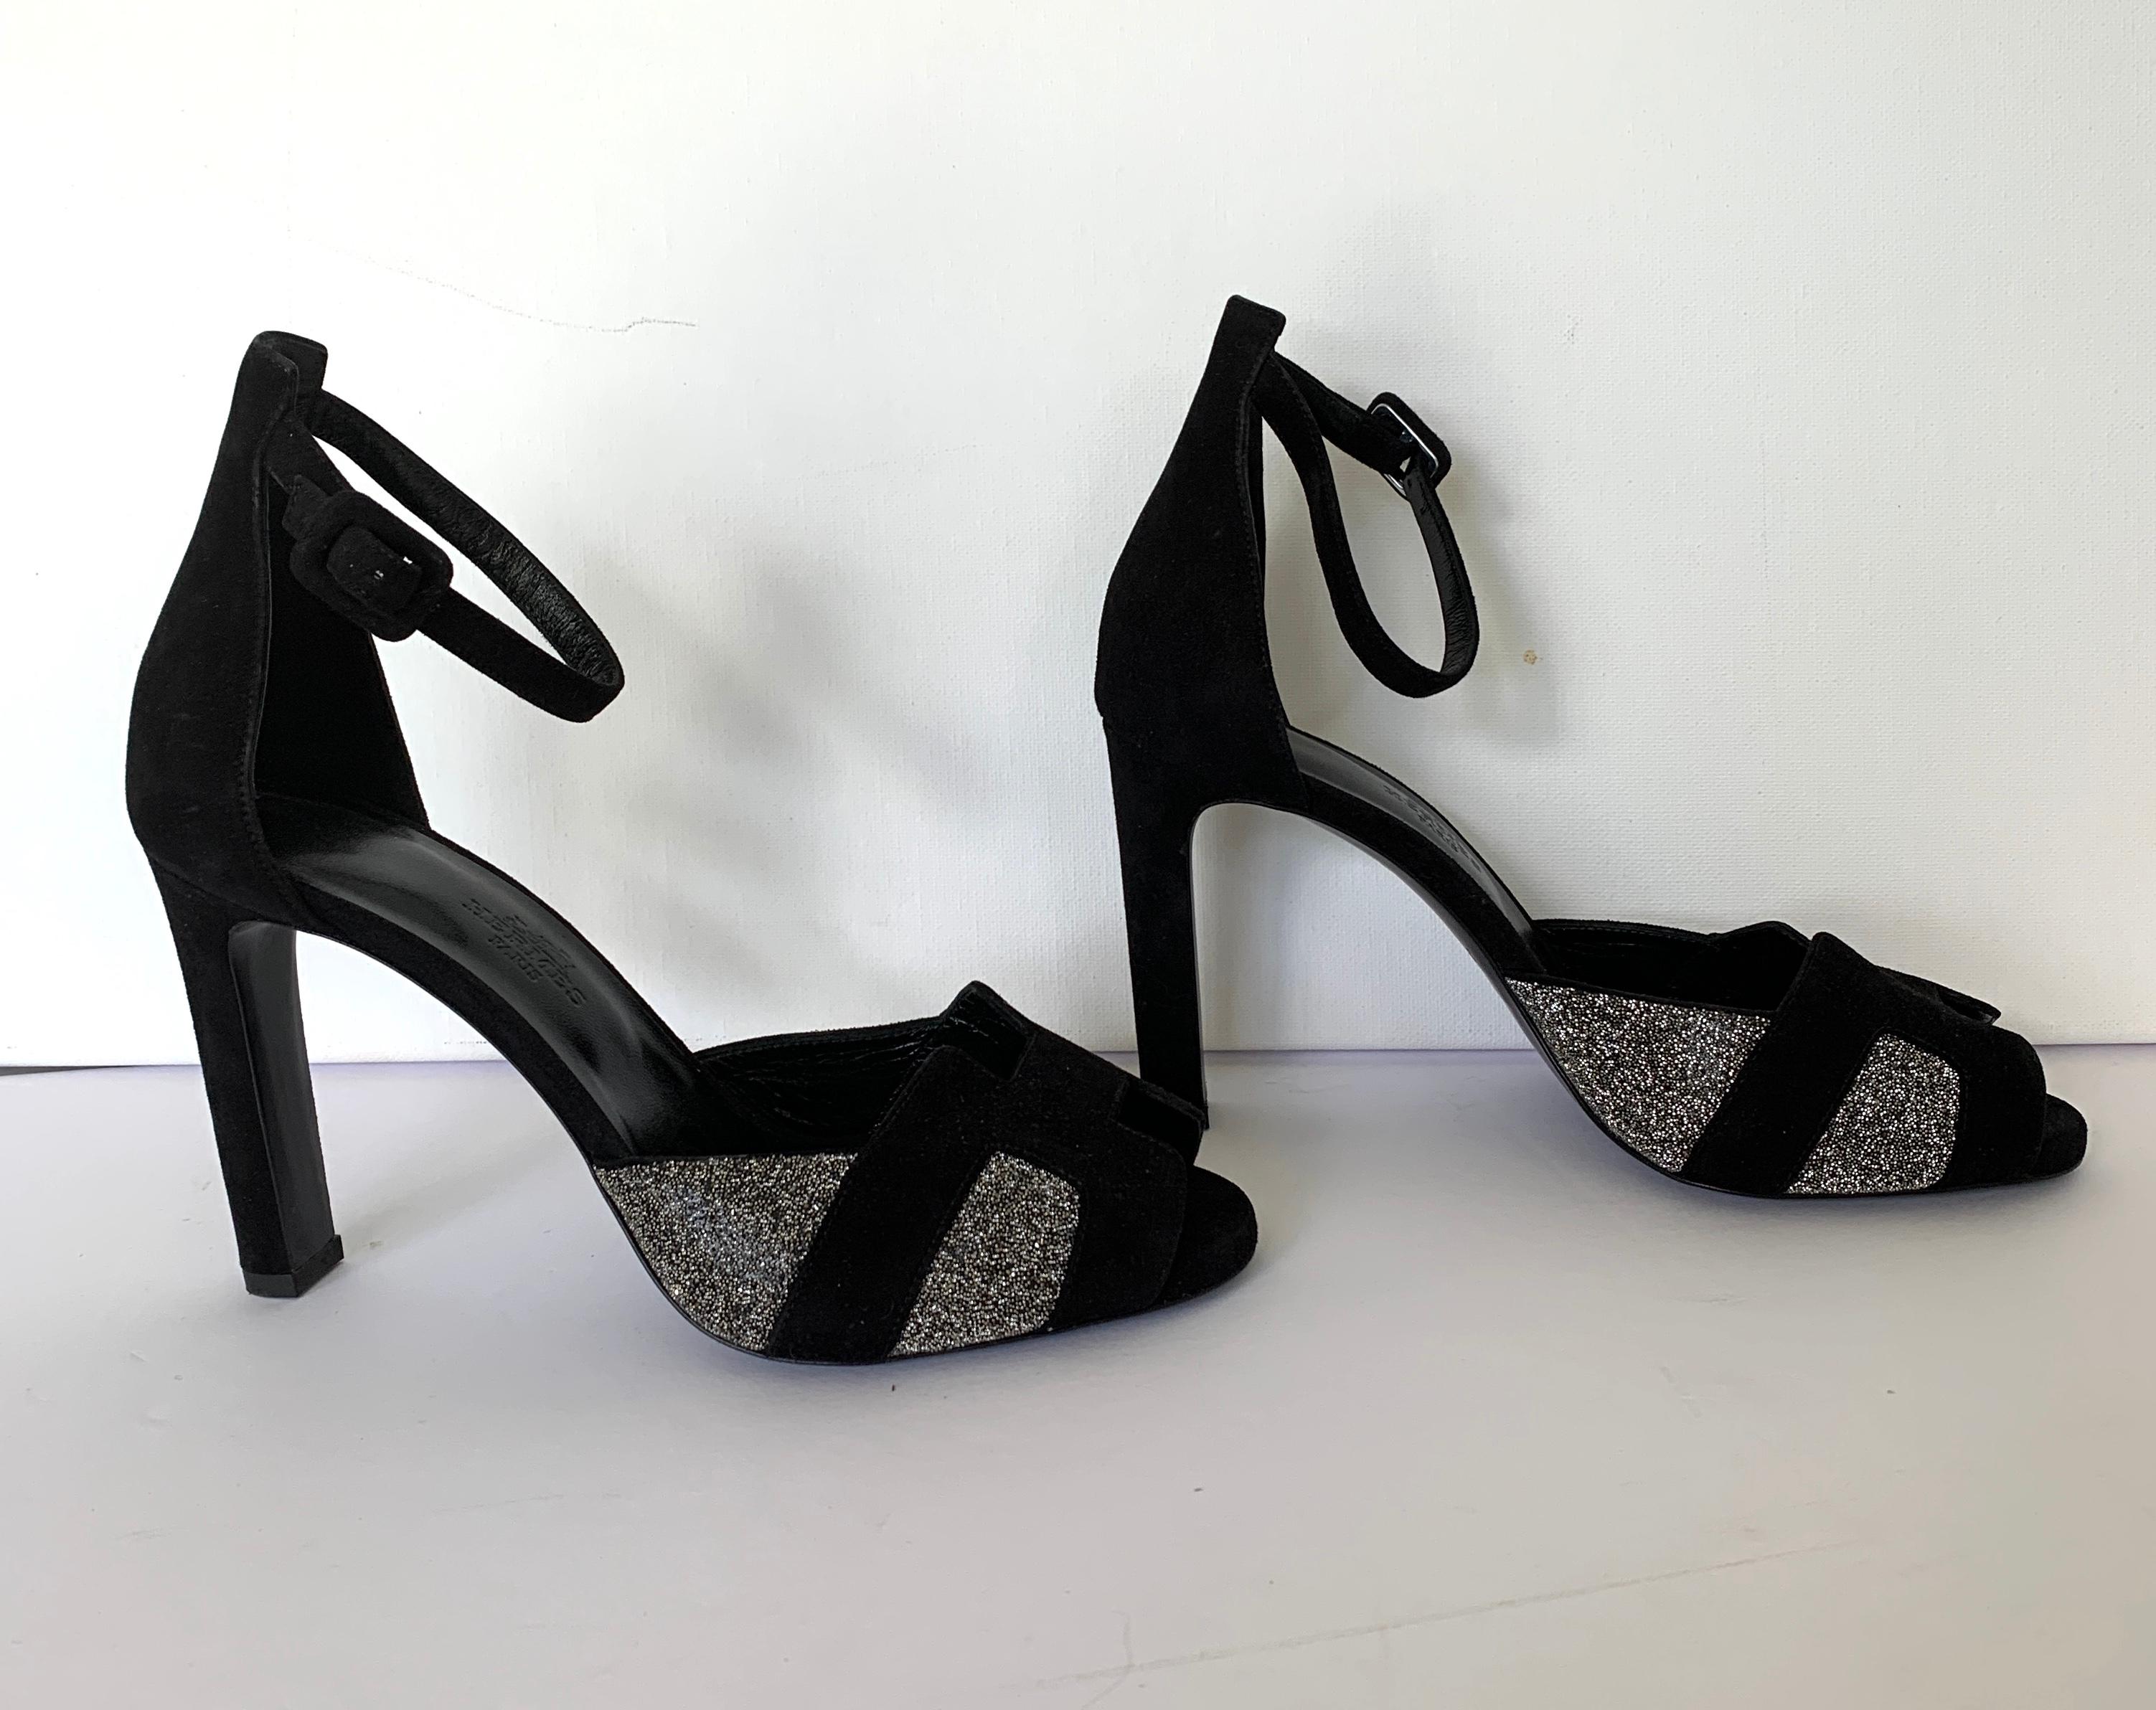 Absolutely stunning Hermes High Heel Sandals
Black Suede adorned with crystal beads
3.5 